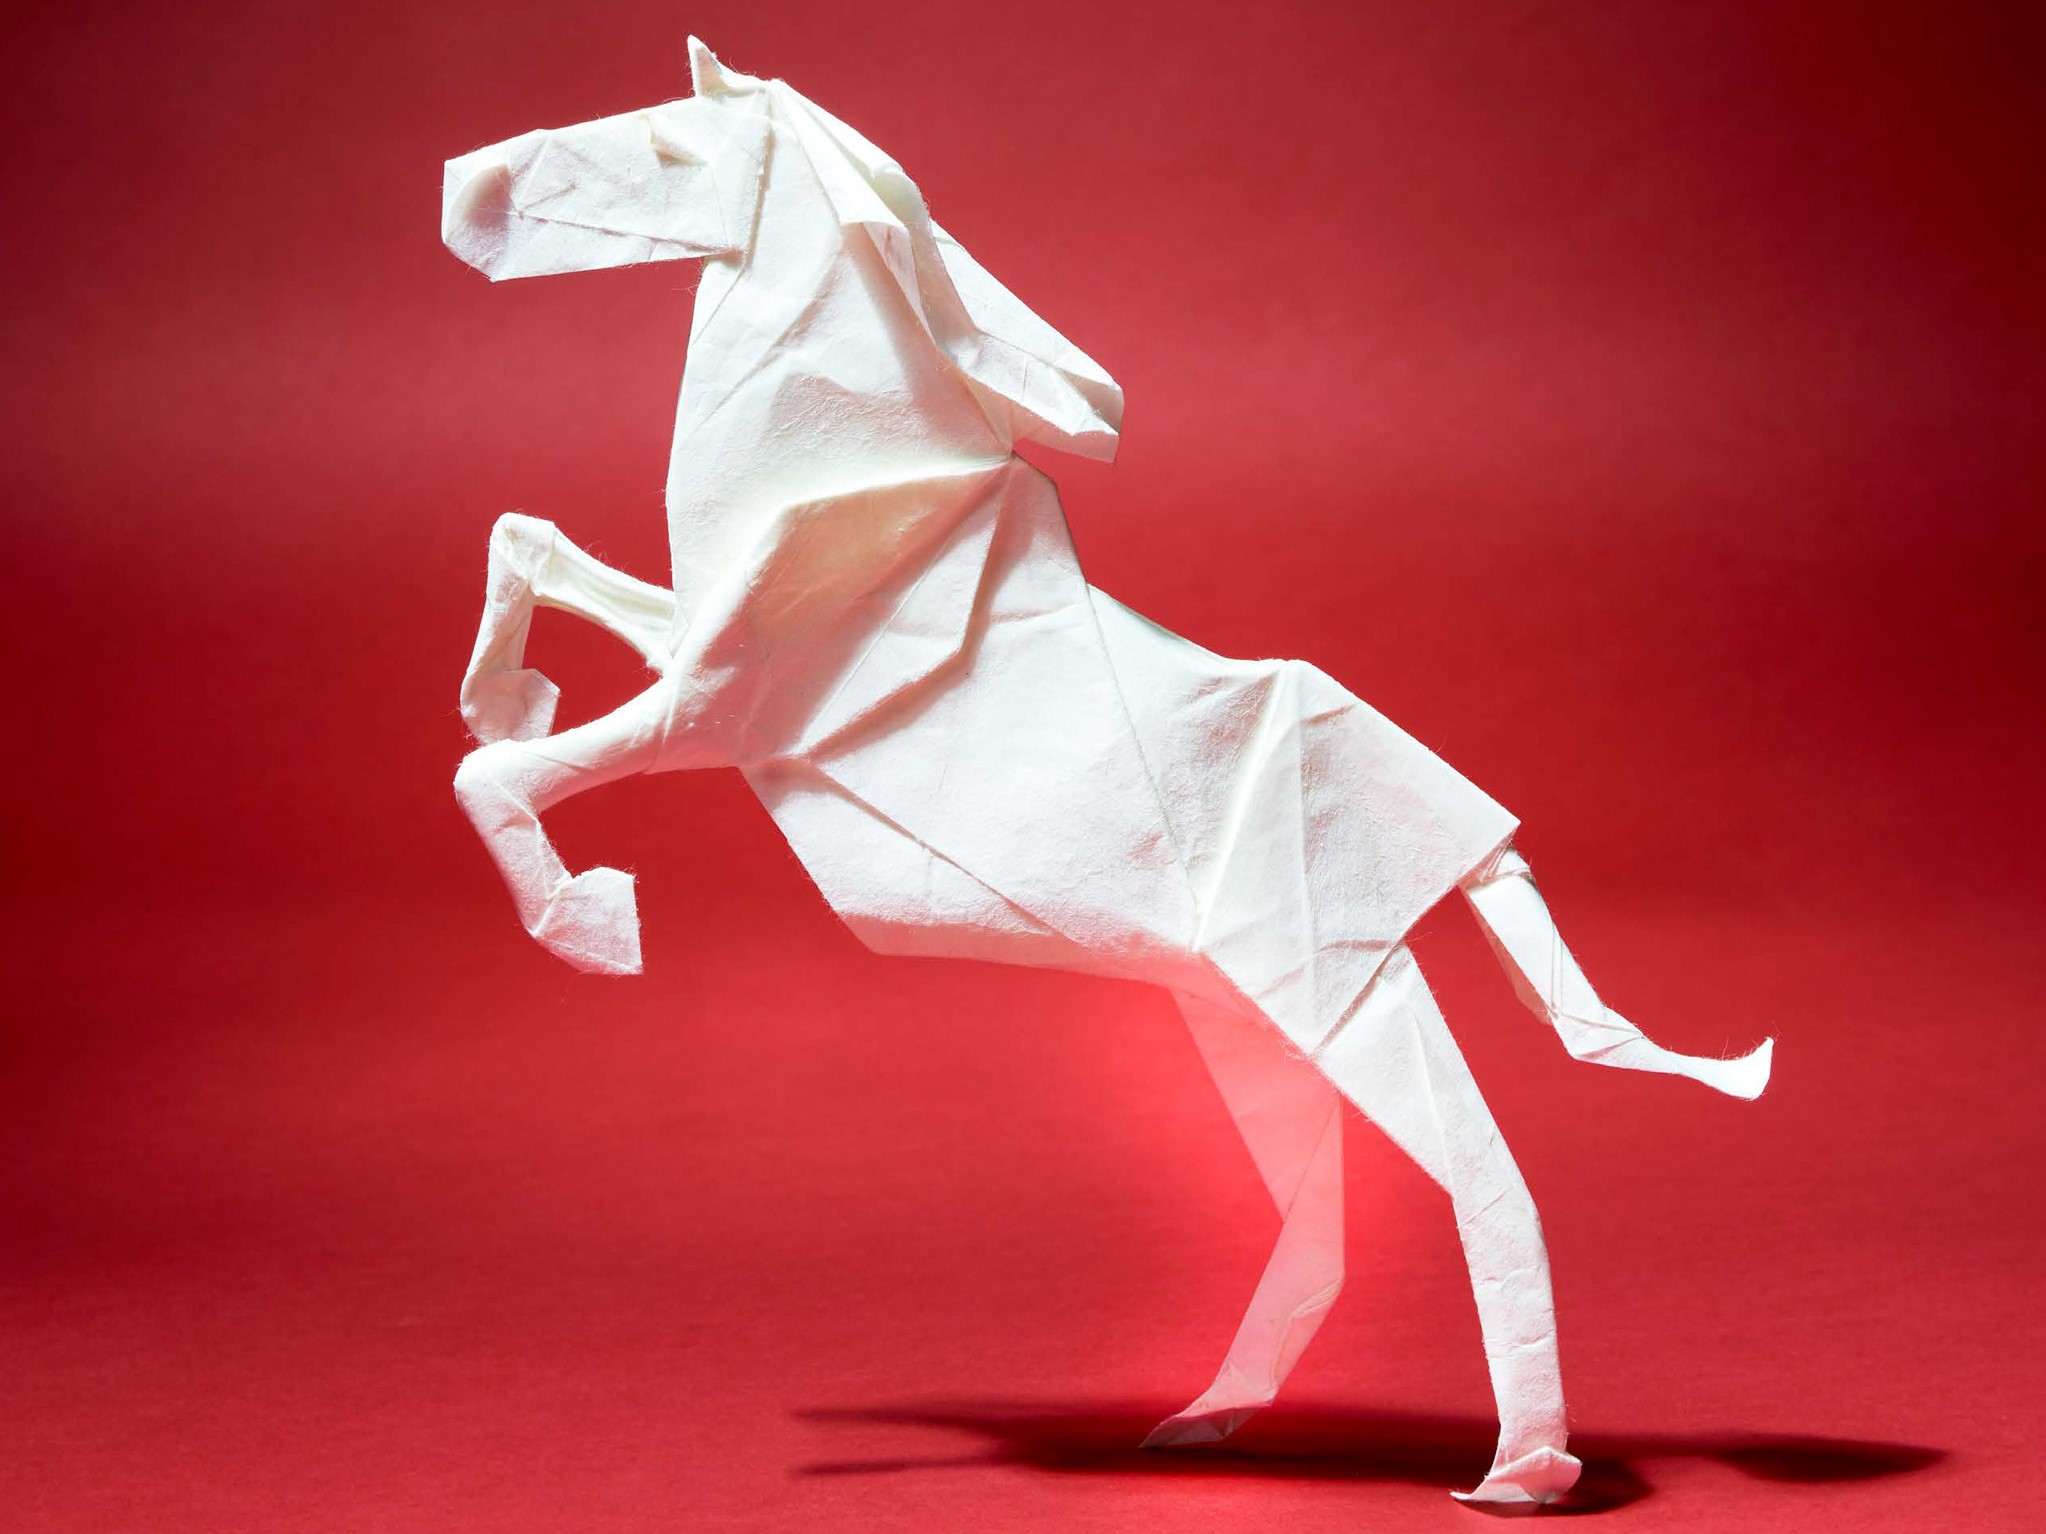 Origami horse on a red background